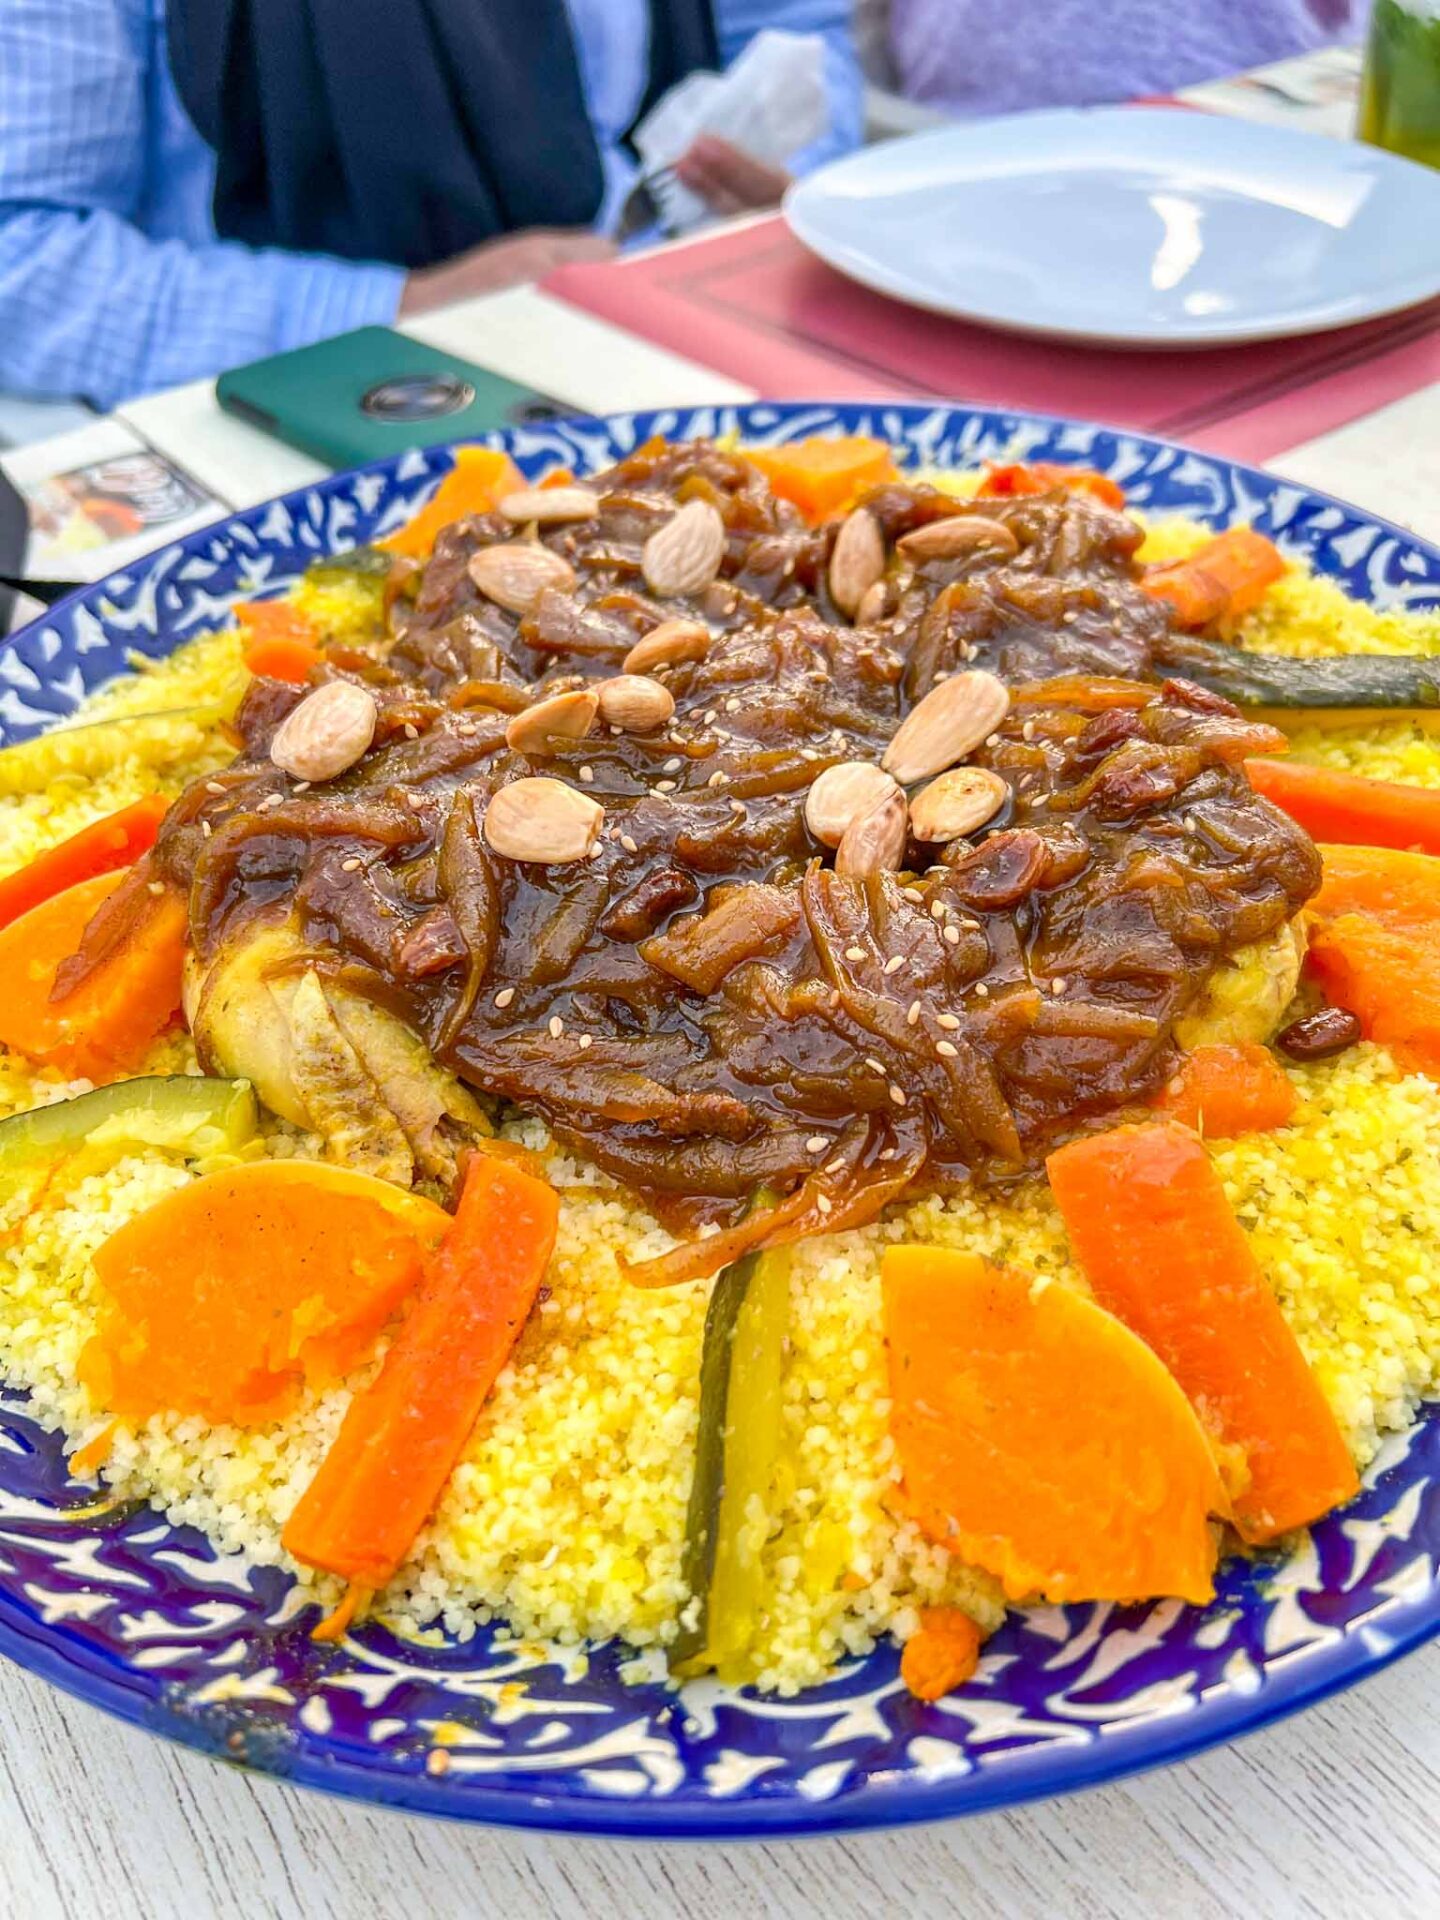 The Wandering Quinn Travel Blog travel tips for Muslim Women, moroccan halal food in Spain